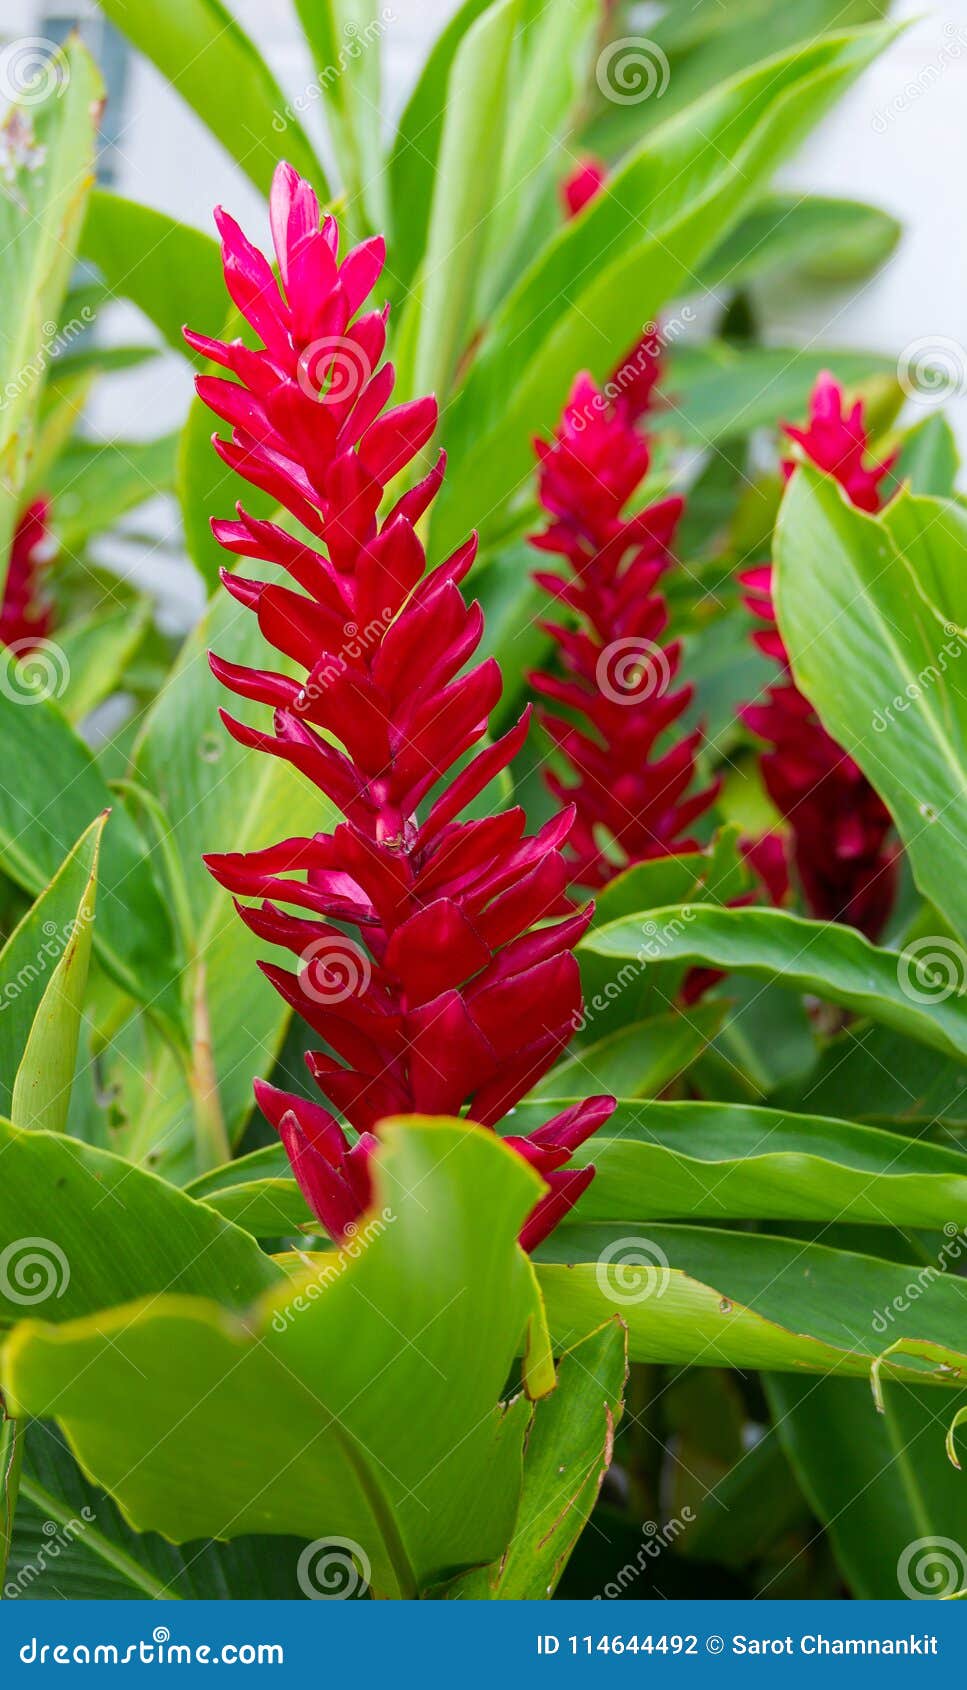 141 321 Red Ginger Photos Free Royalty Free Stock Photos From Dreamstime